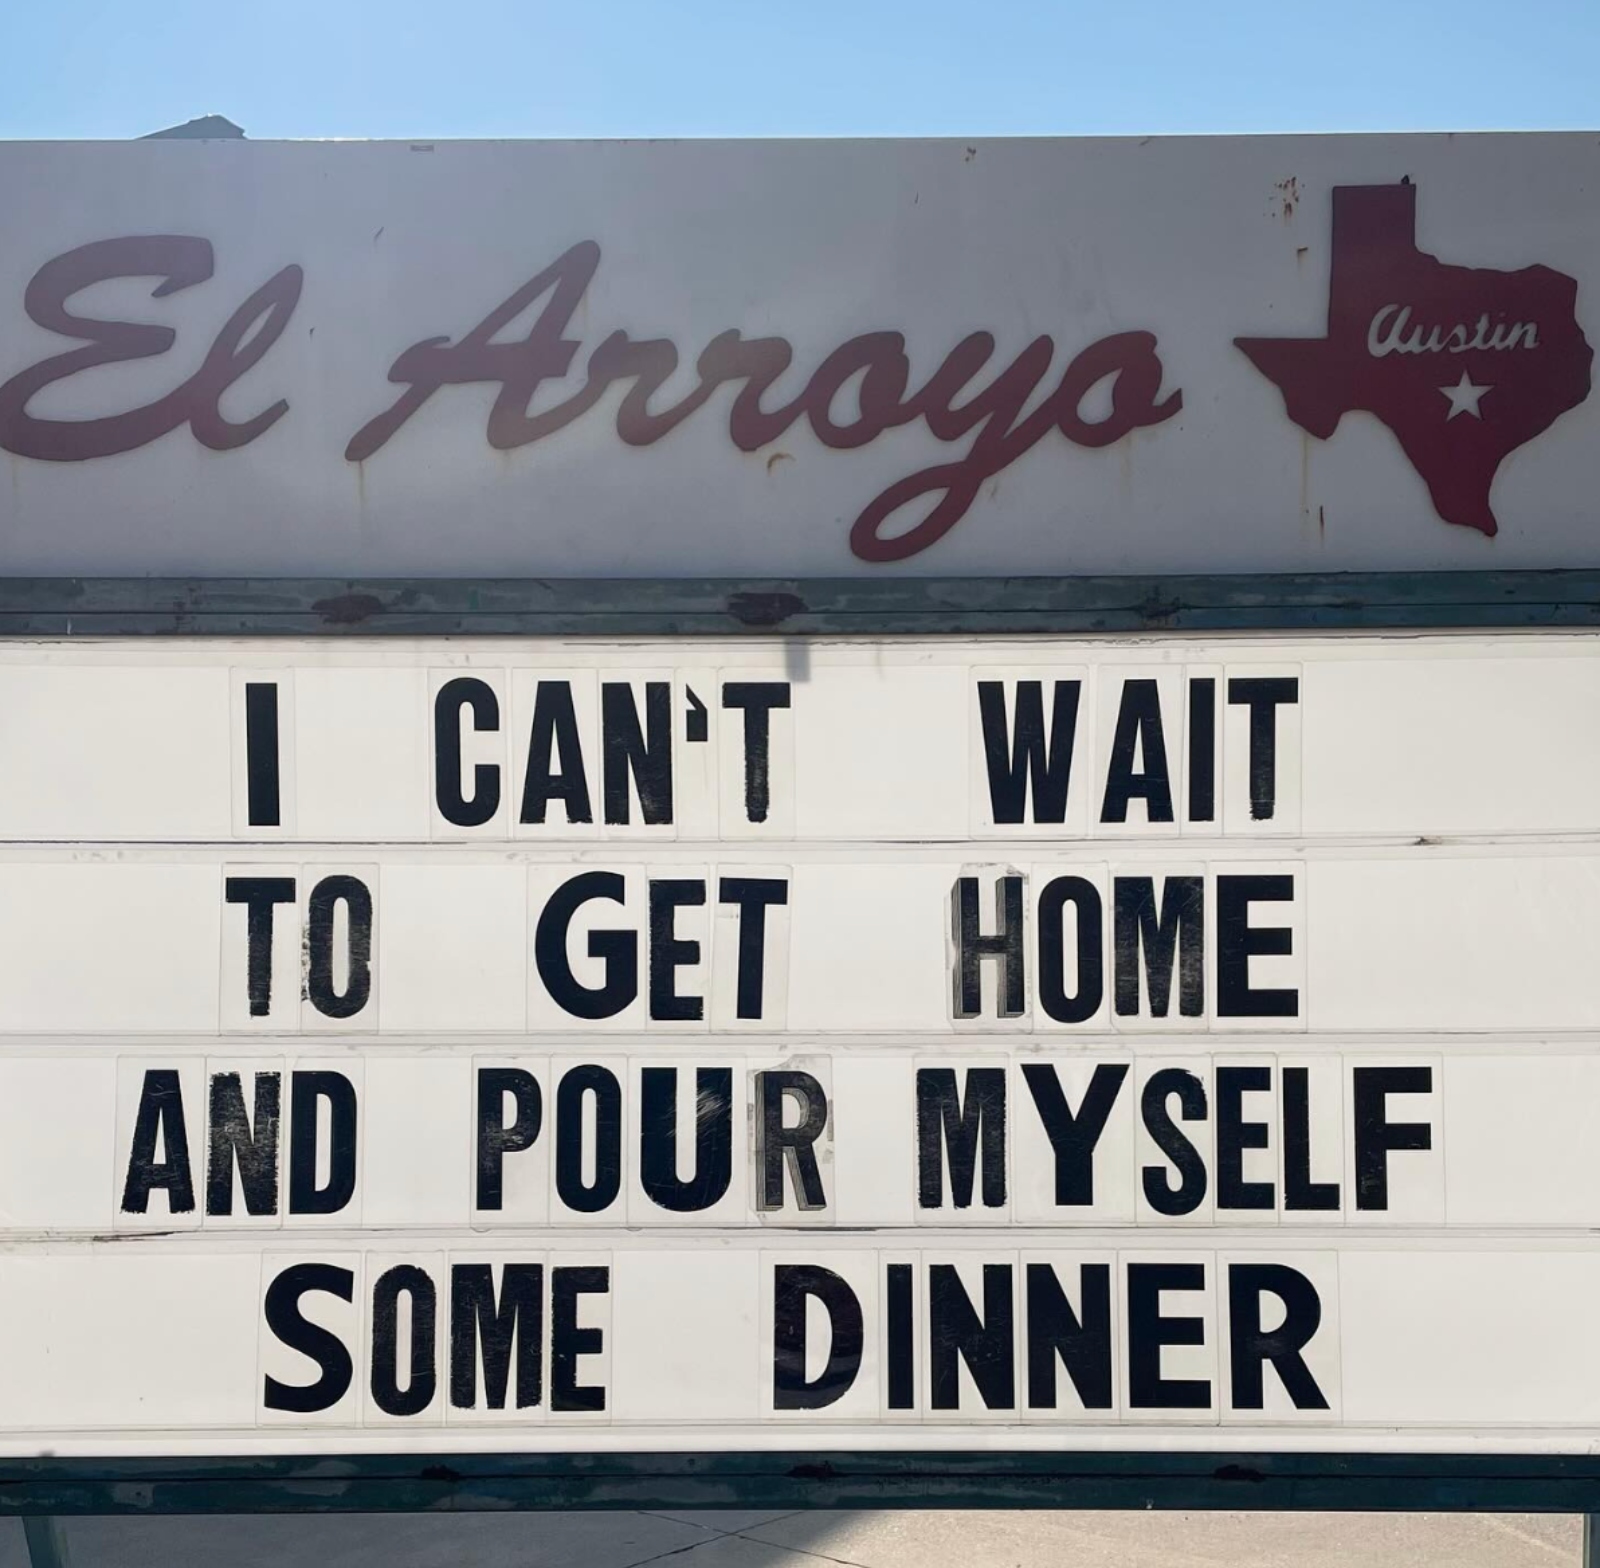 hilarious El Arroyo sign meme about dinner and drinking